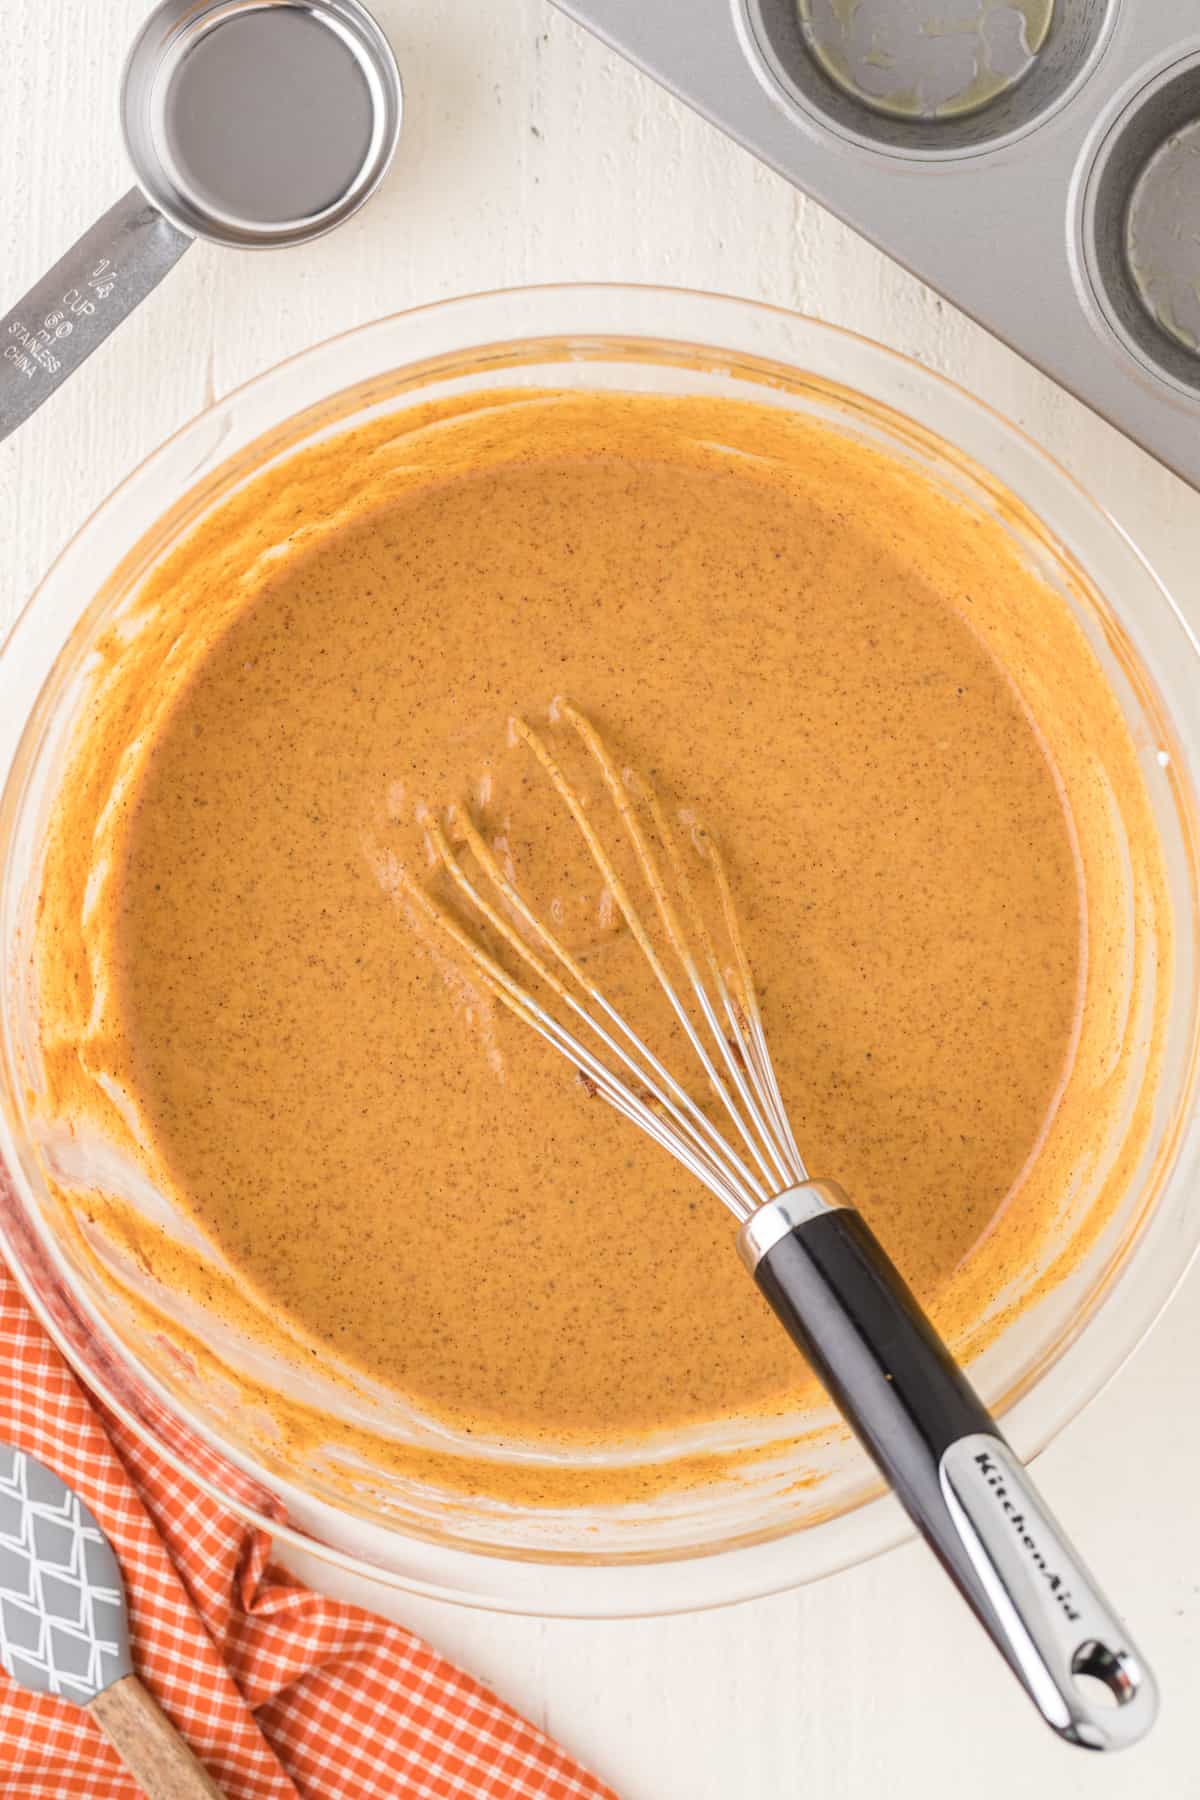 Pumpkin pie filling mixture in a bowl with a whisk.